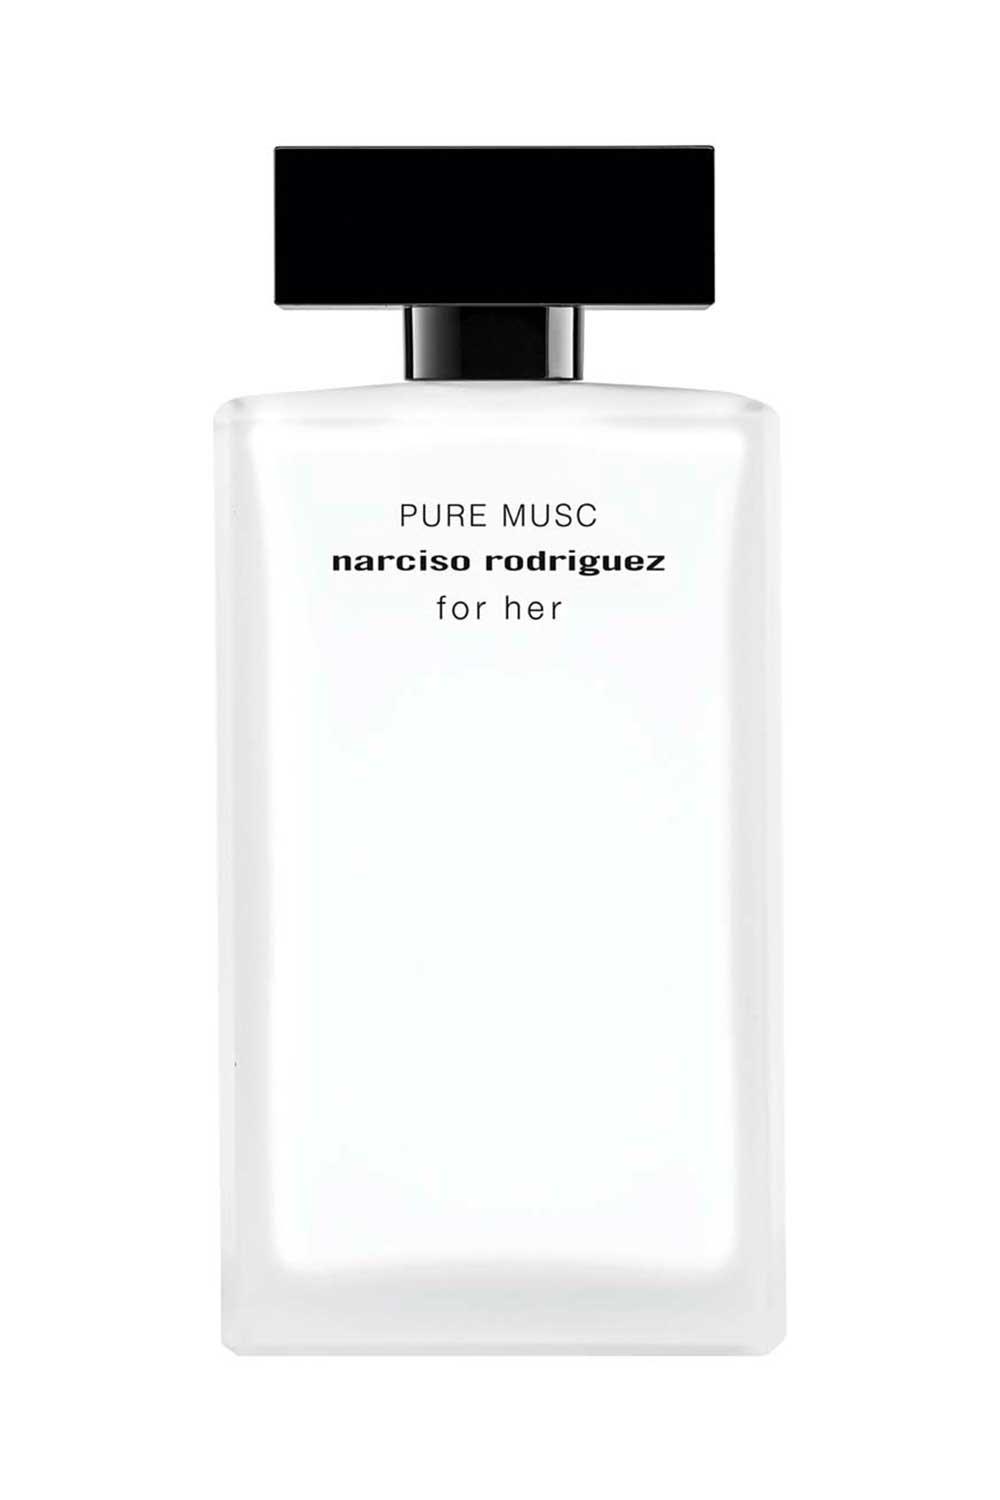 Narciso8. Eau de Parfum for her Pure Musc 100 ml Narciso Rodriguez